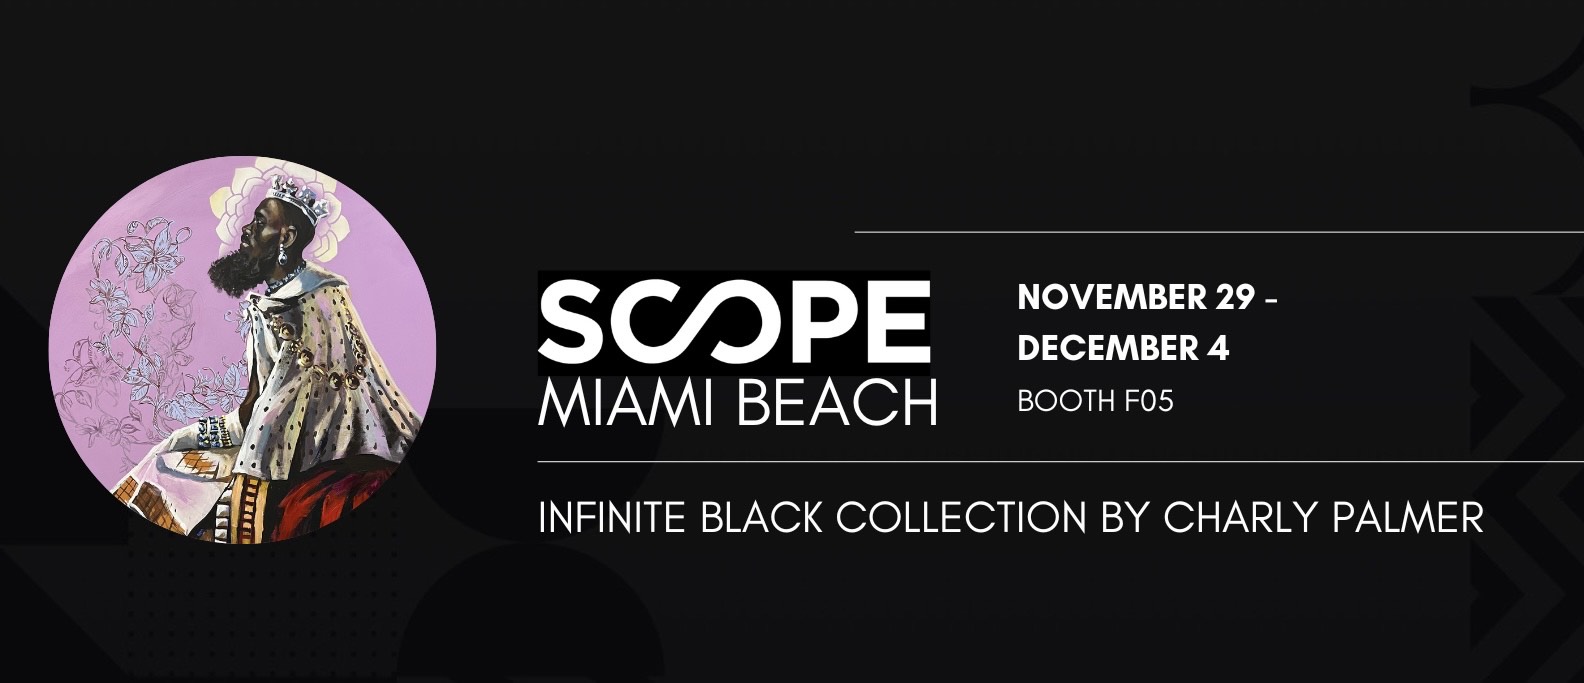 Knowhere Art Gallery Presents Artist Charly Palmer's Infinite Black Collection at Scope Miami Beach